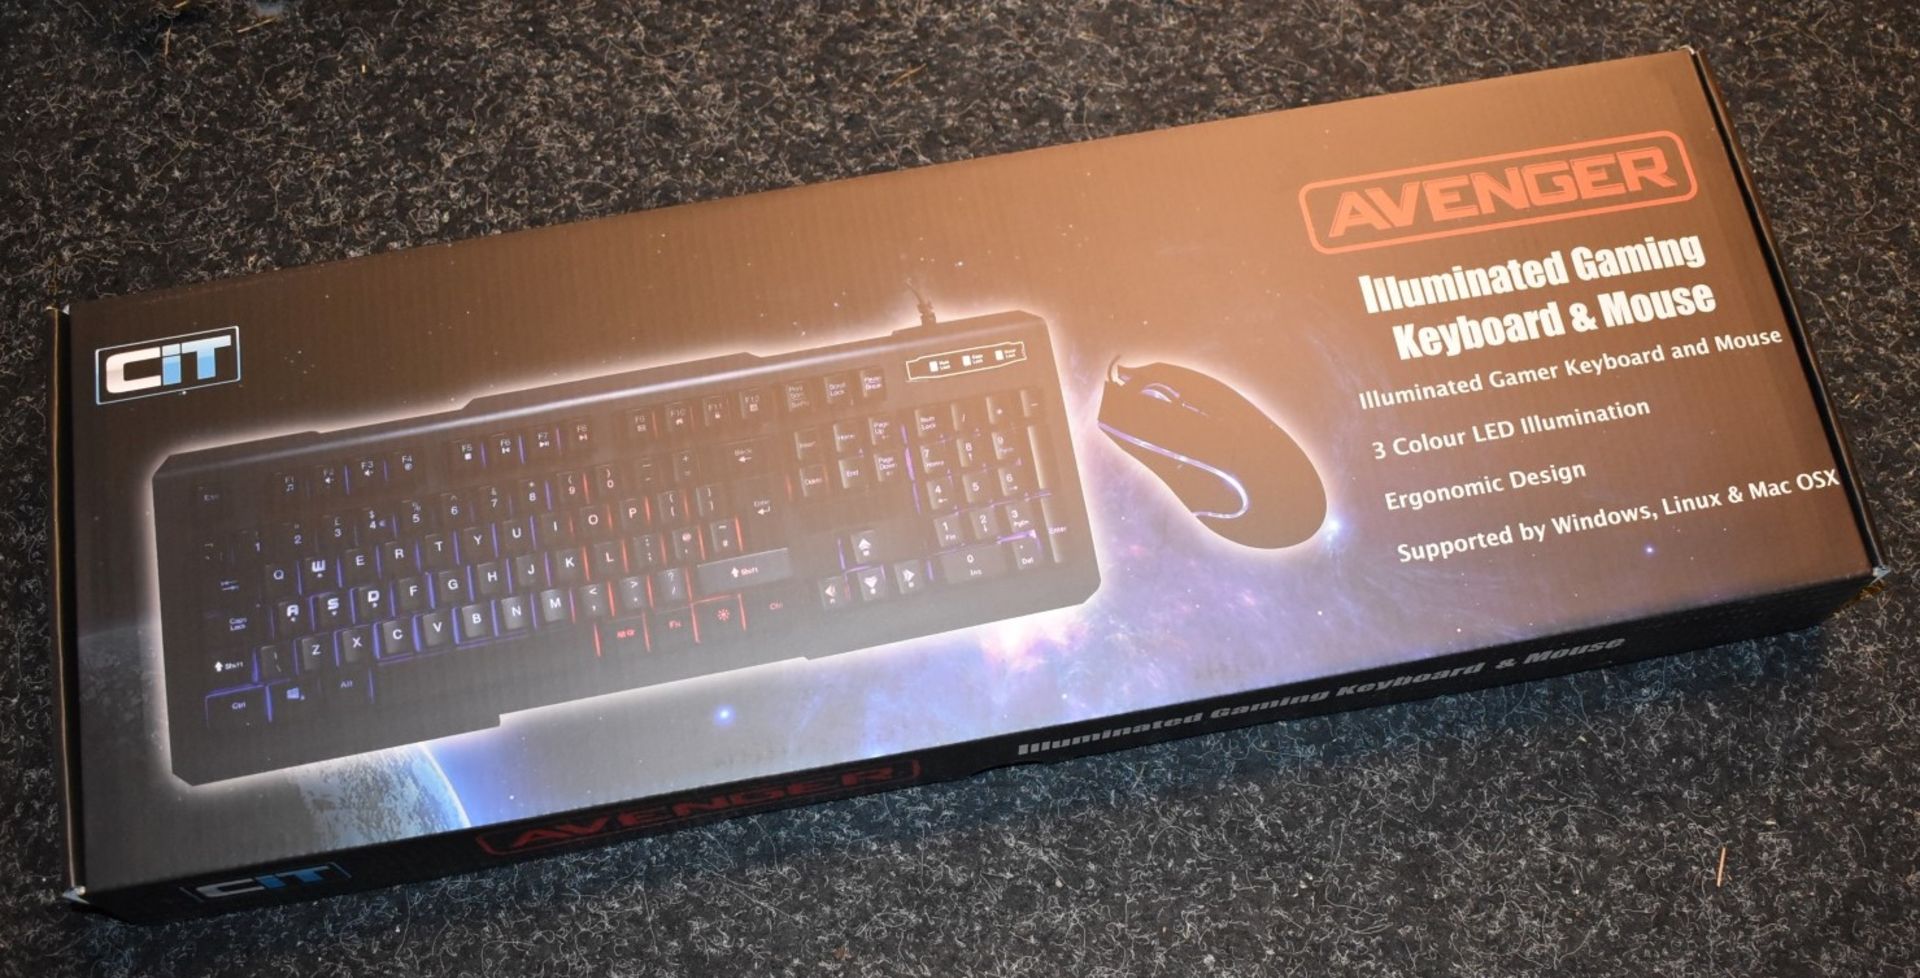 1 x CiT Avenger Gaming Keyboard and Mouse Set - Features 3 Colour Mode LED Backlight, Swappable